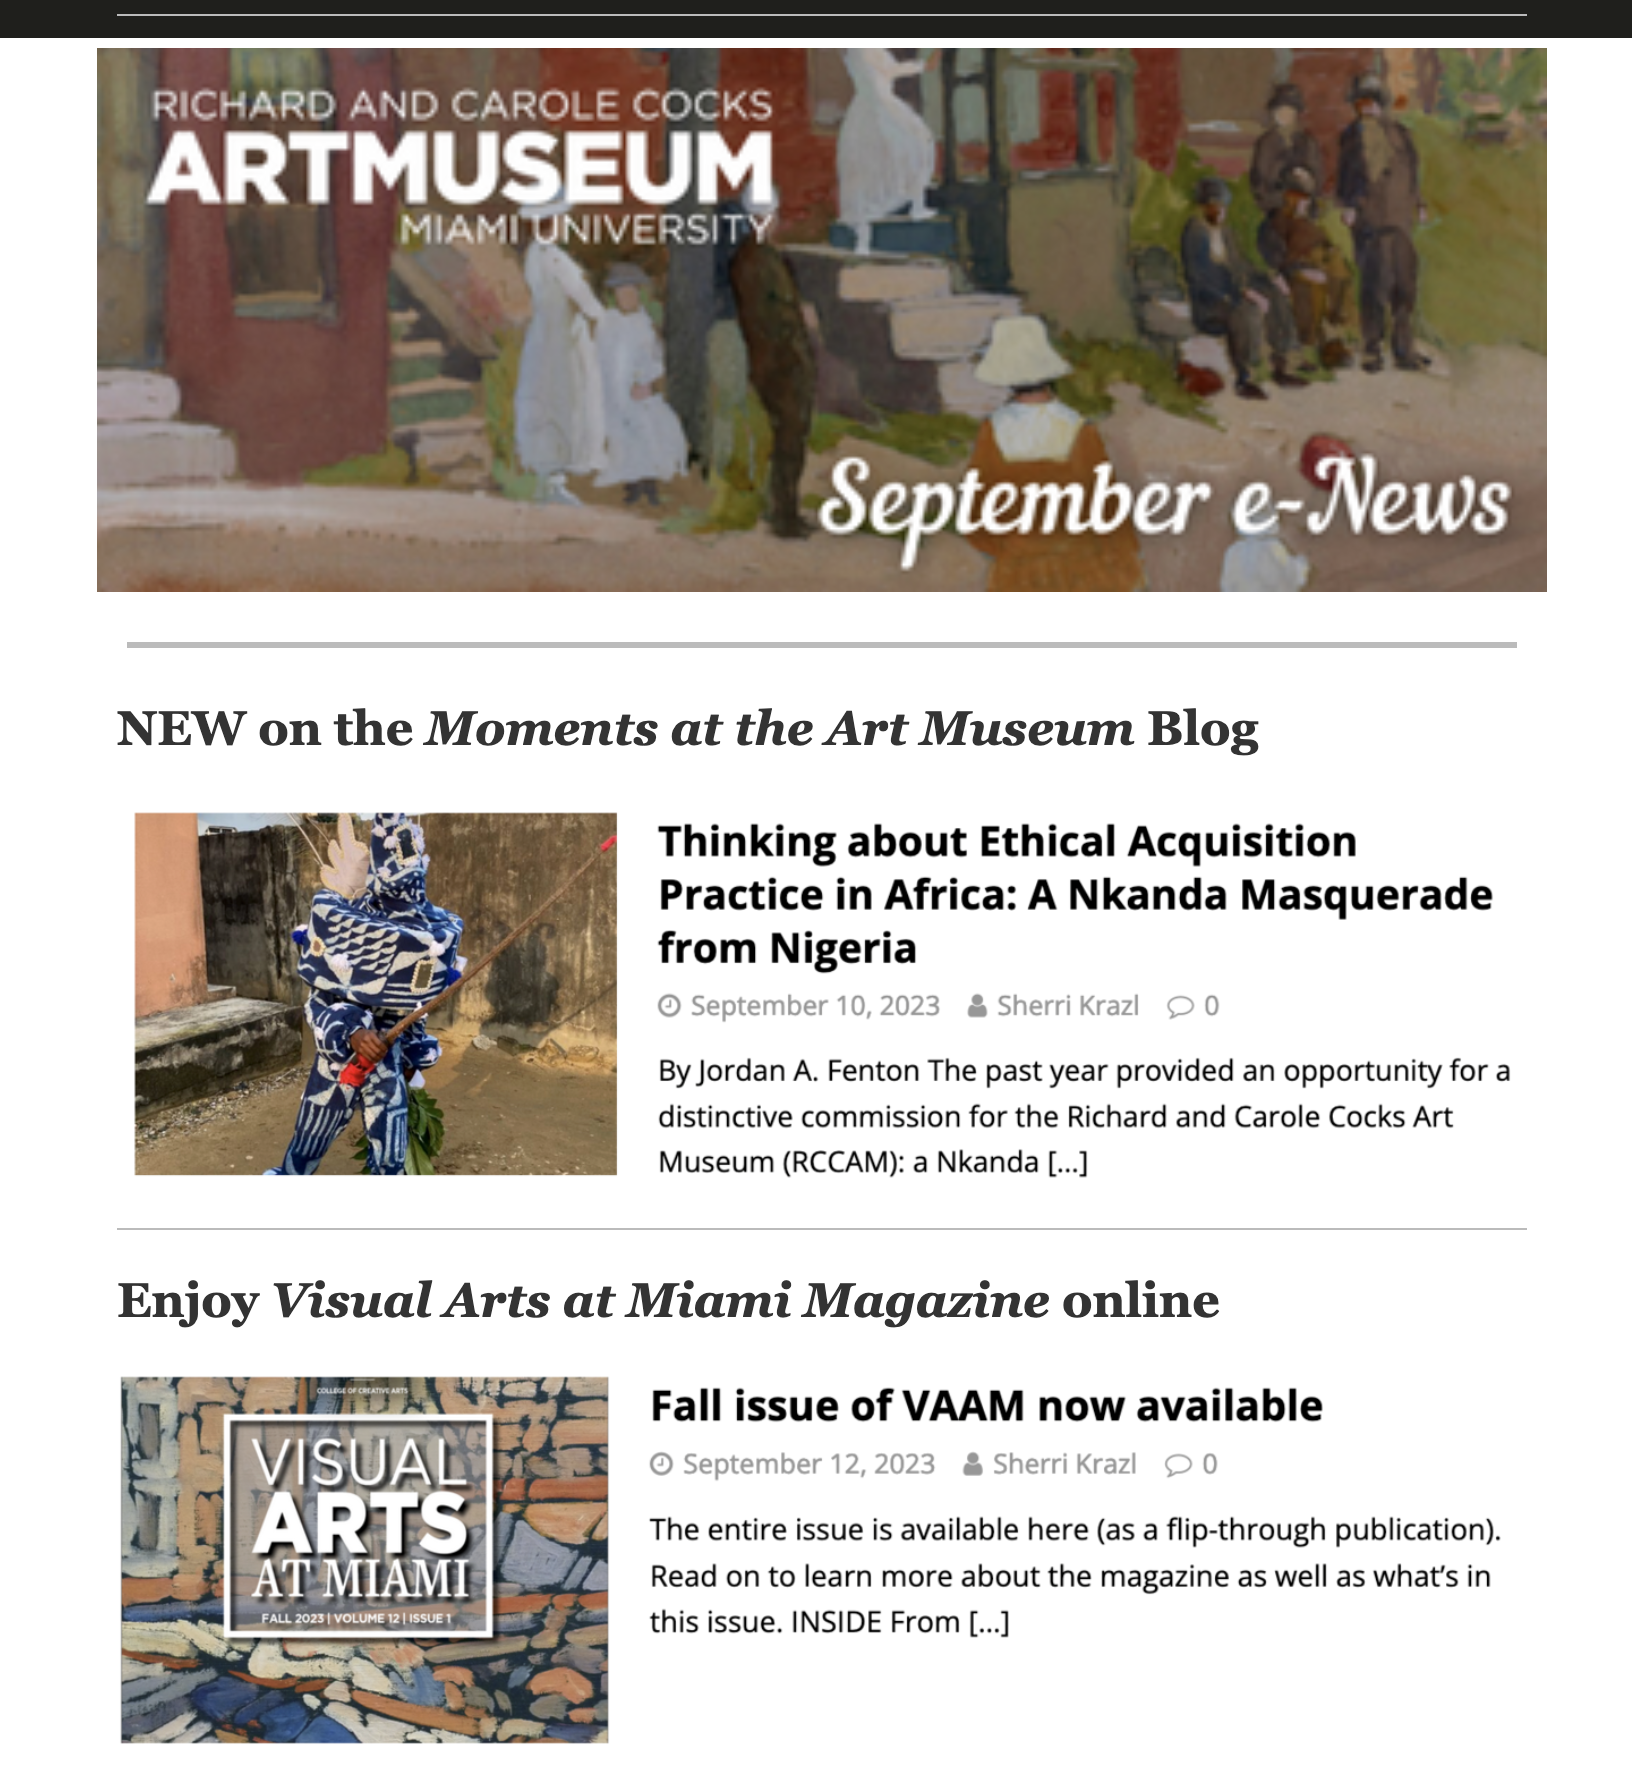 Photo of museum front with the New Exhibitions Opening Aug 22